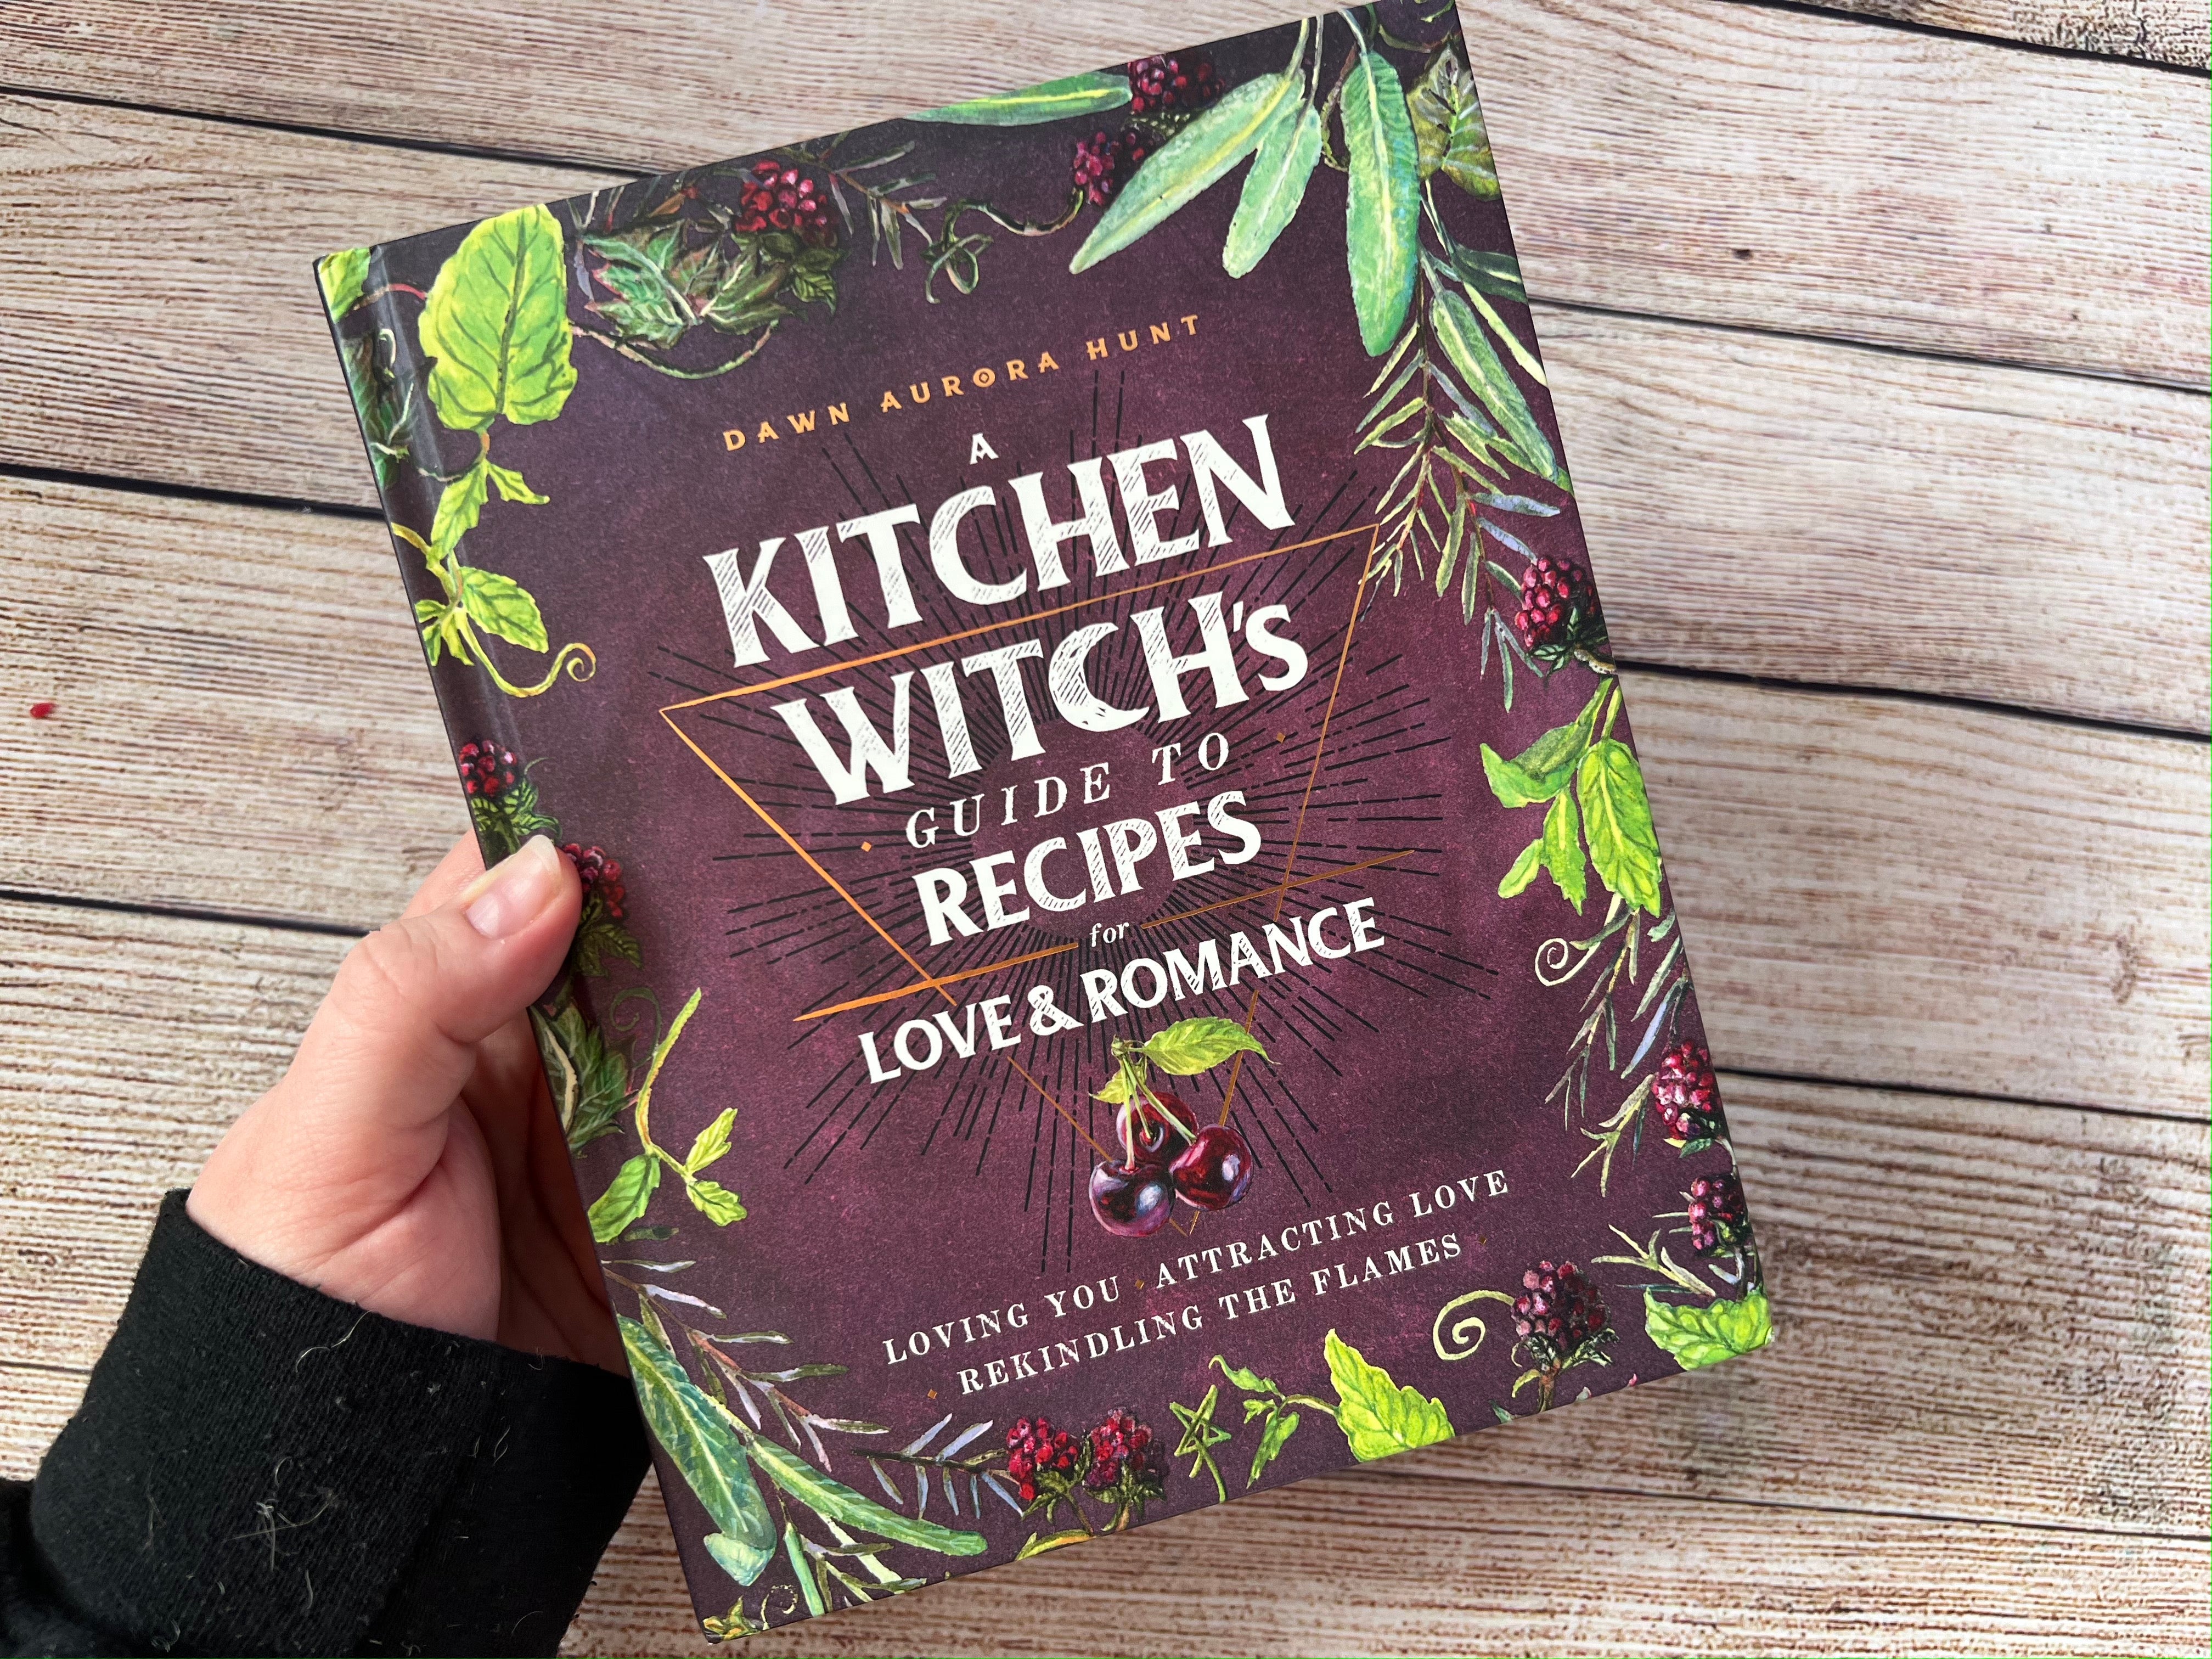 A Kitchen Witch's Guide To Recipes for Love & Romance